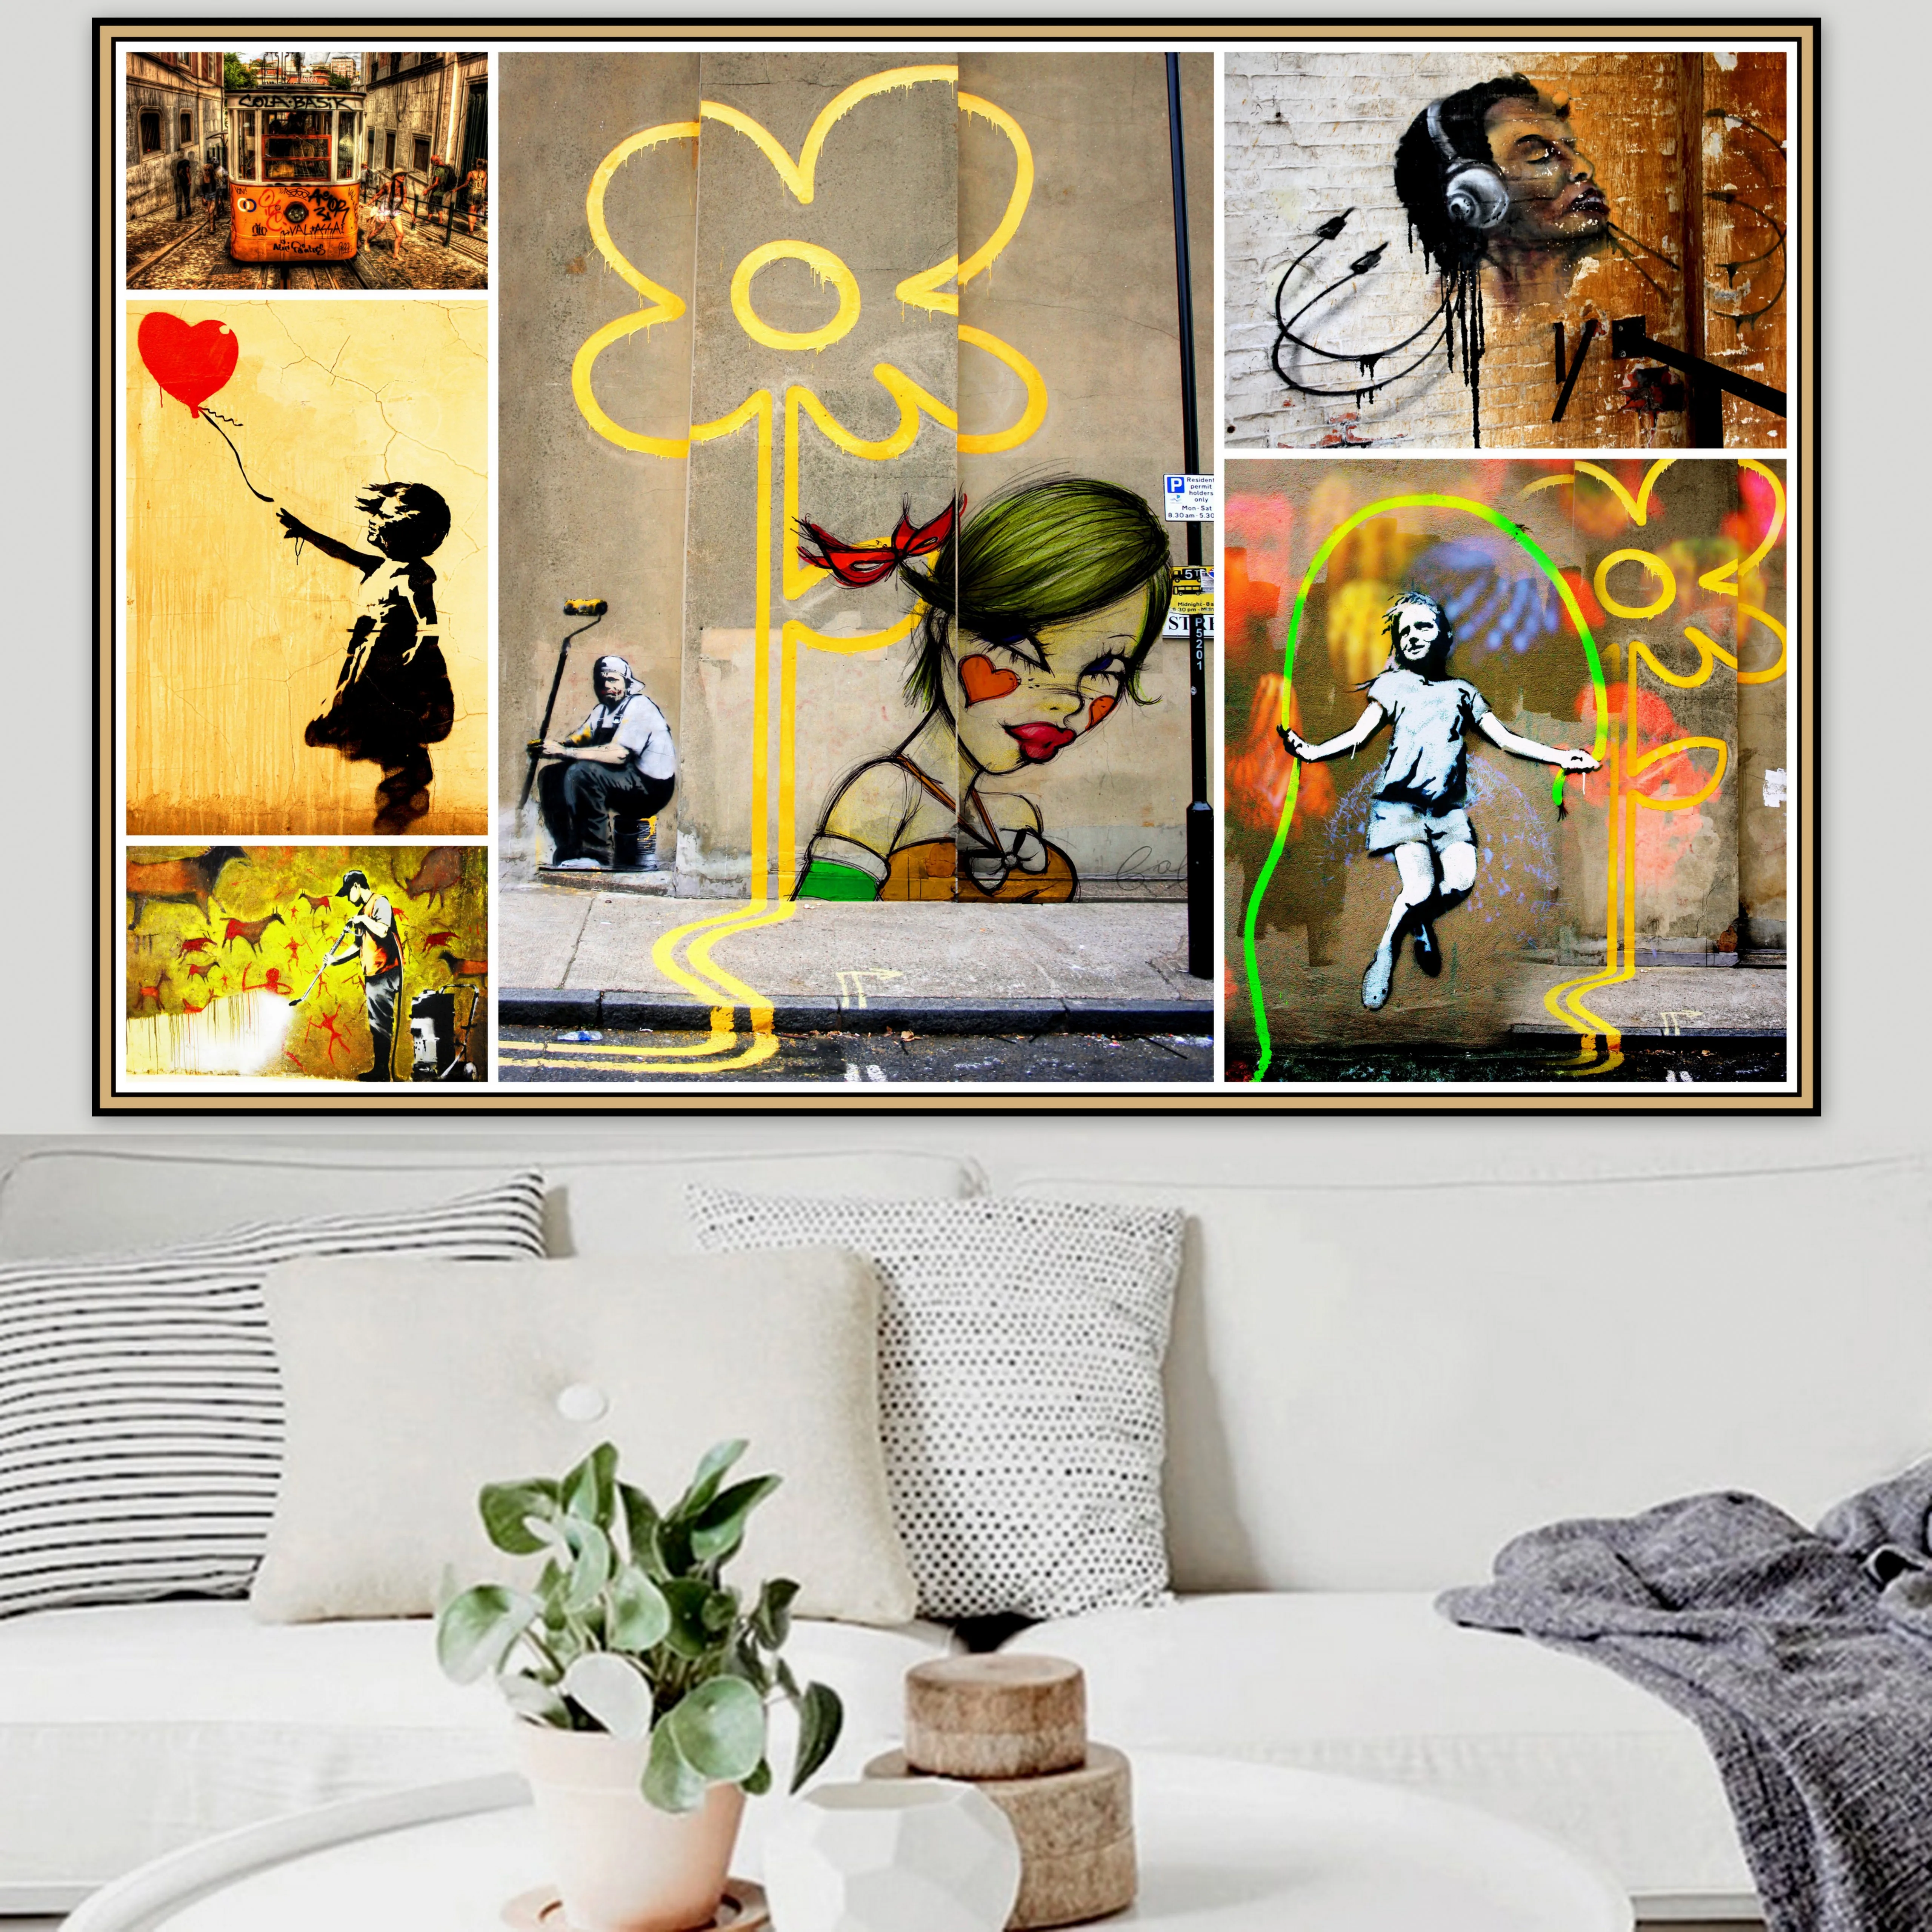 

Happy Girl Graffiti Urban Street Art Mural Canvas Painting Poster and Print POP Wall Art Pictures for Wall Art Decoration Print